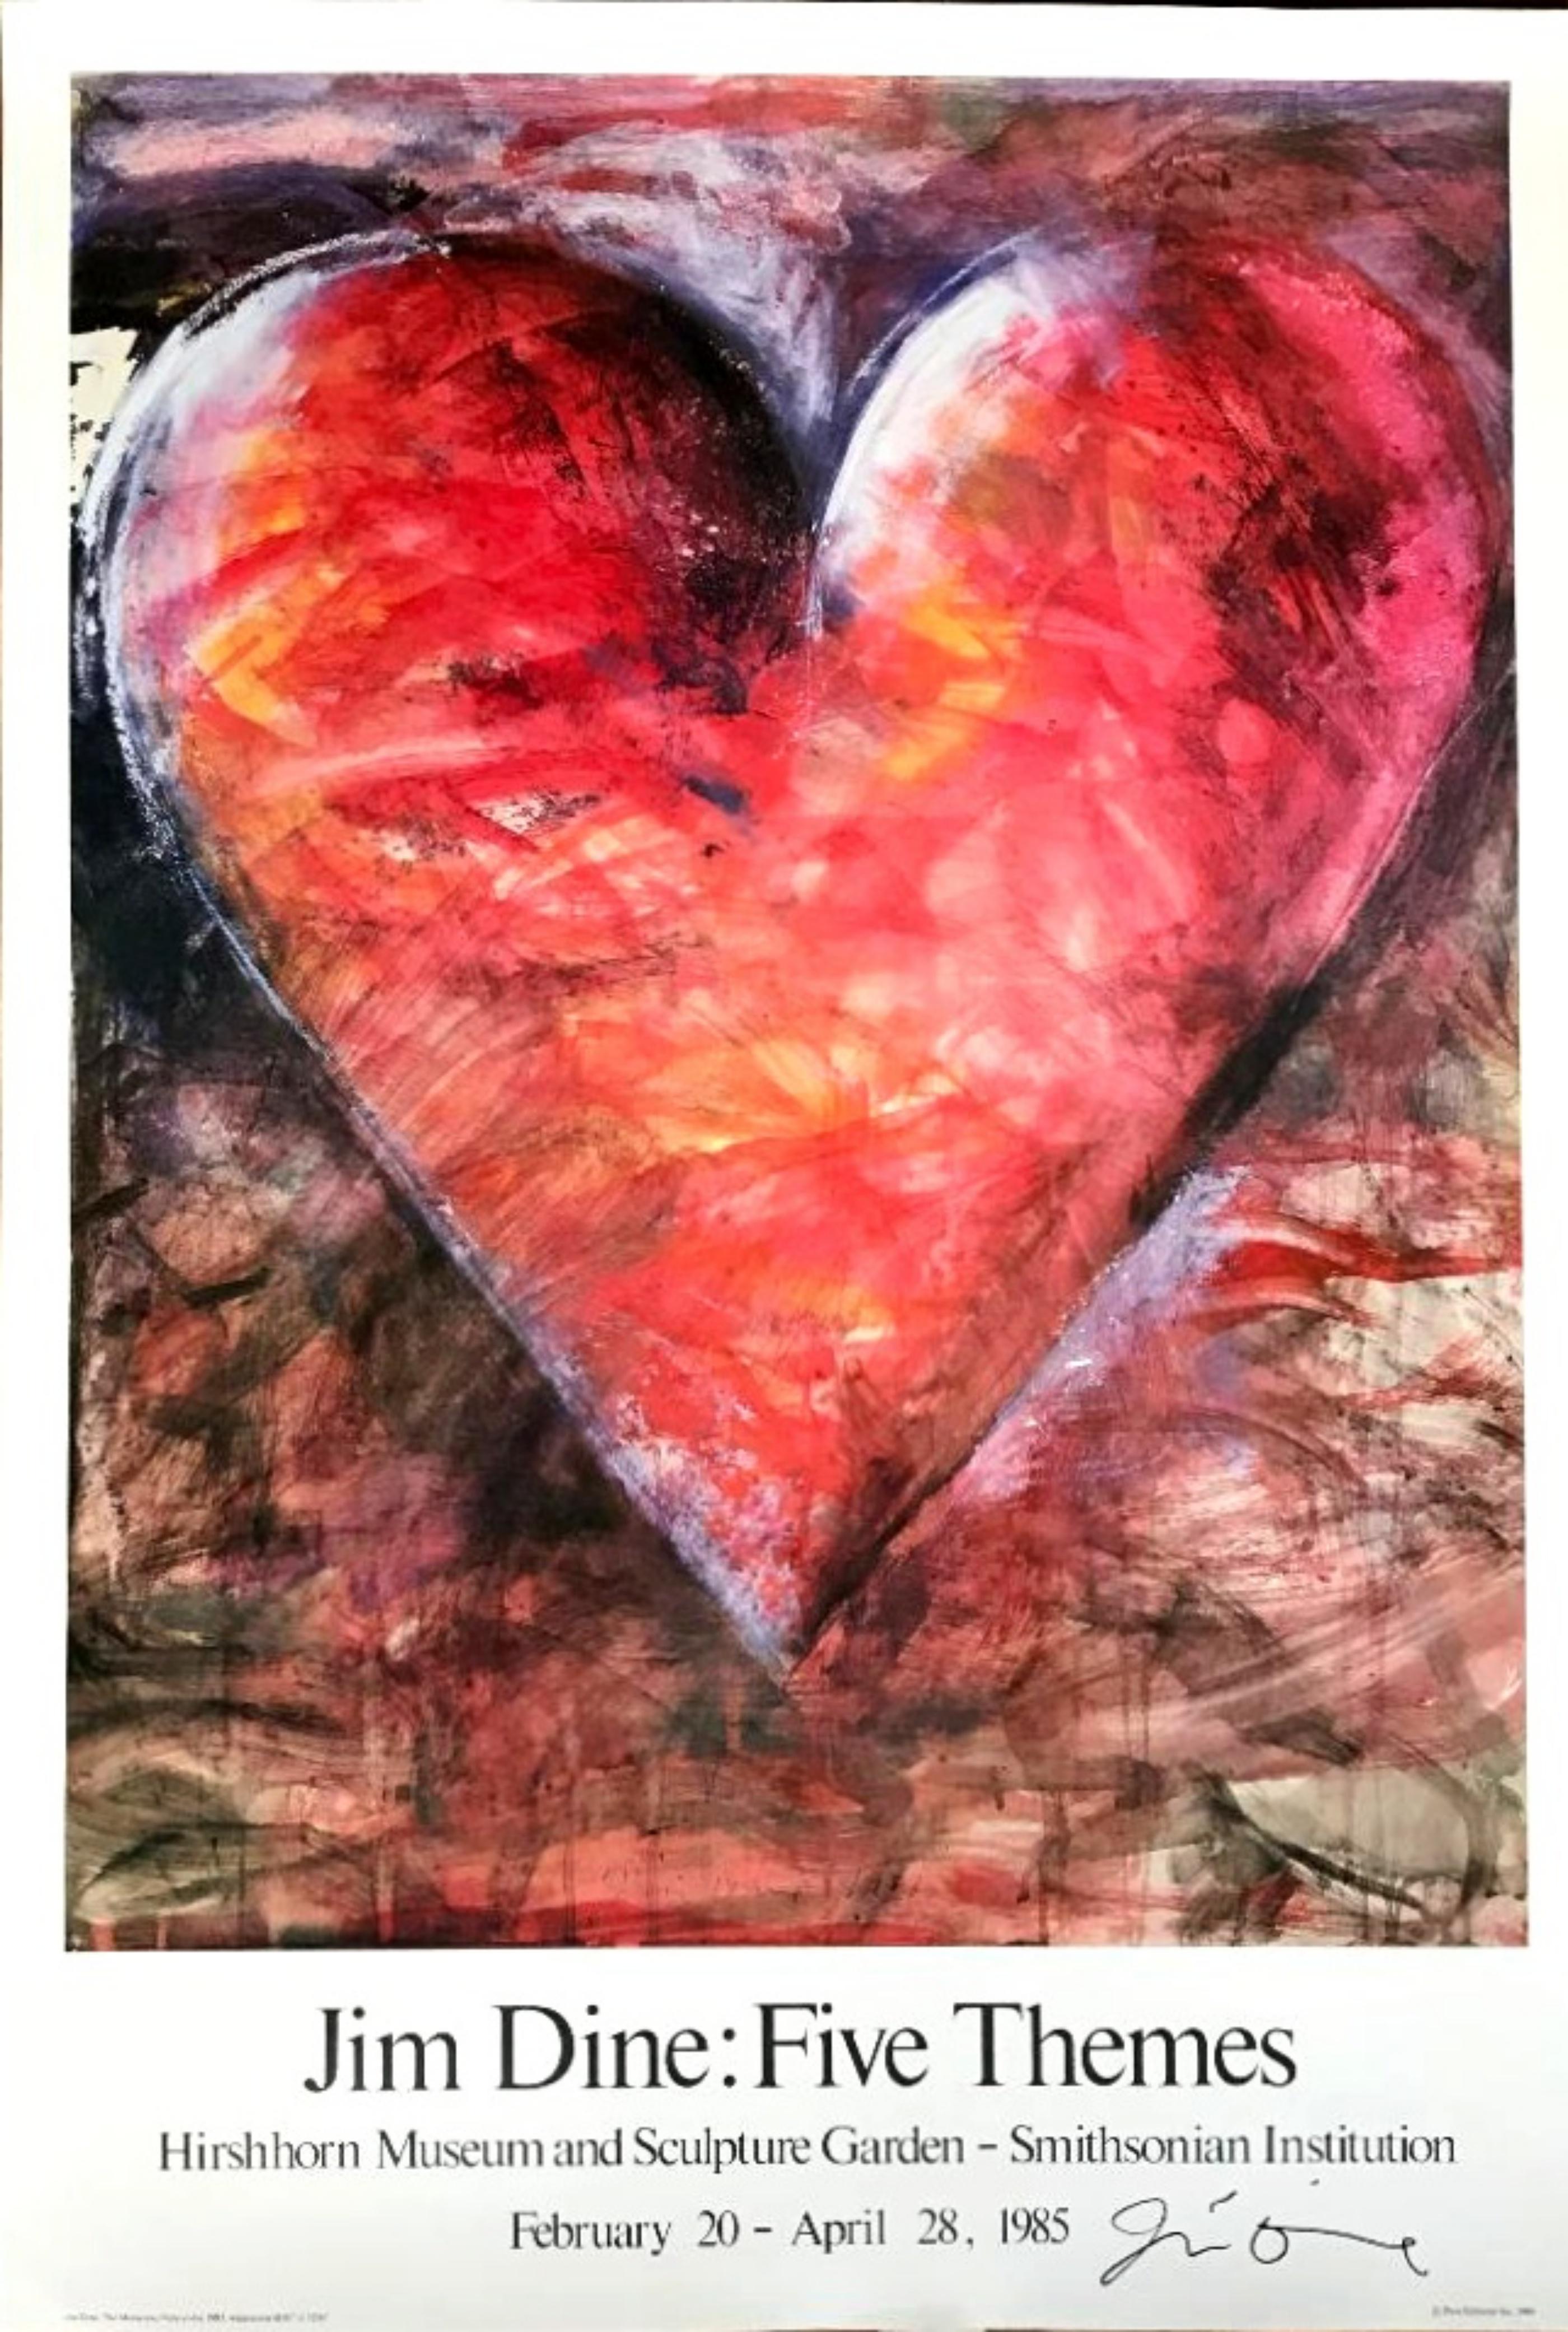 Jim Dine: Five Themes Limited edition red heart poster (Hand Signed by Jim Dine)